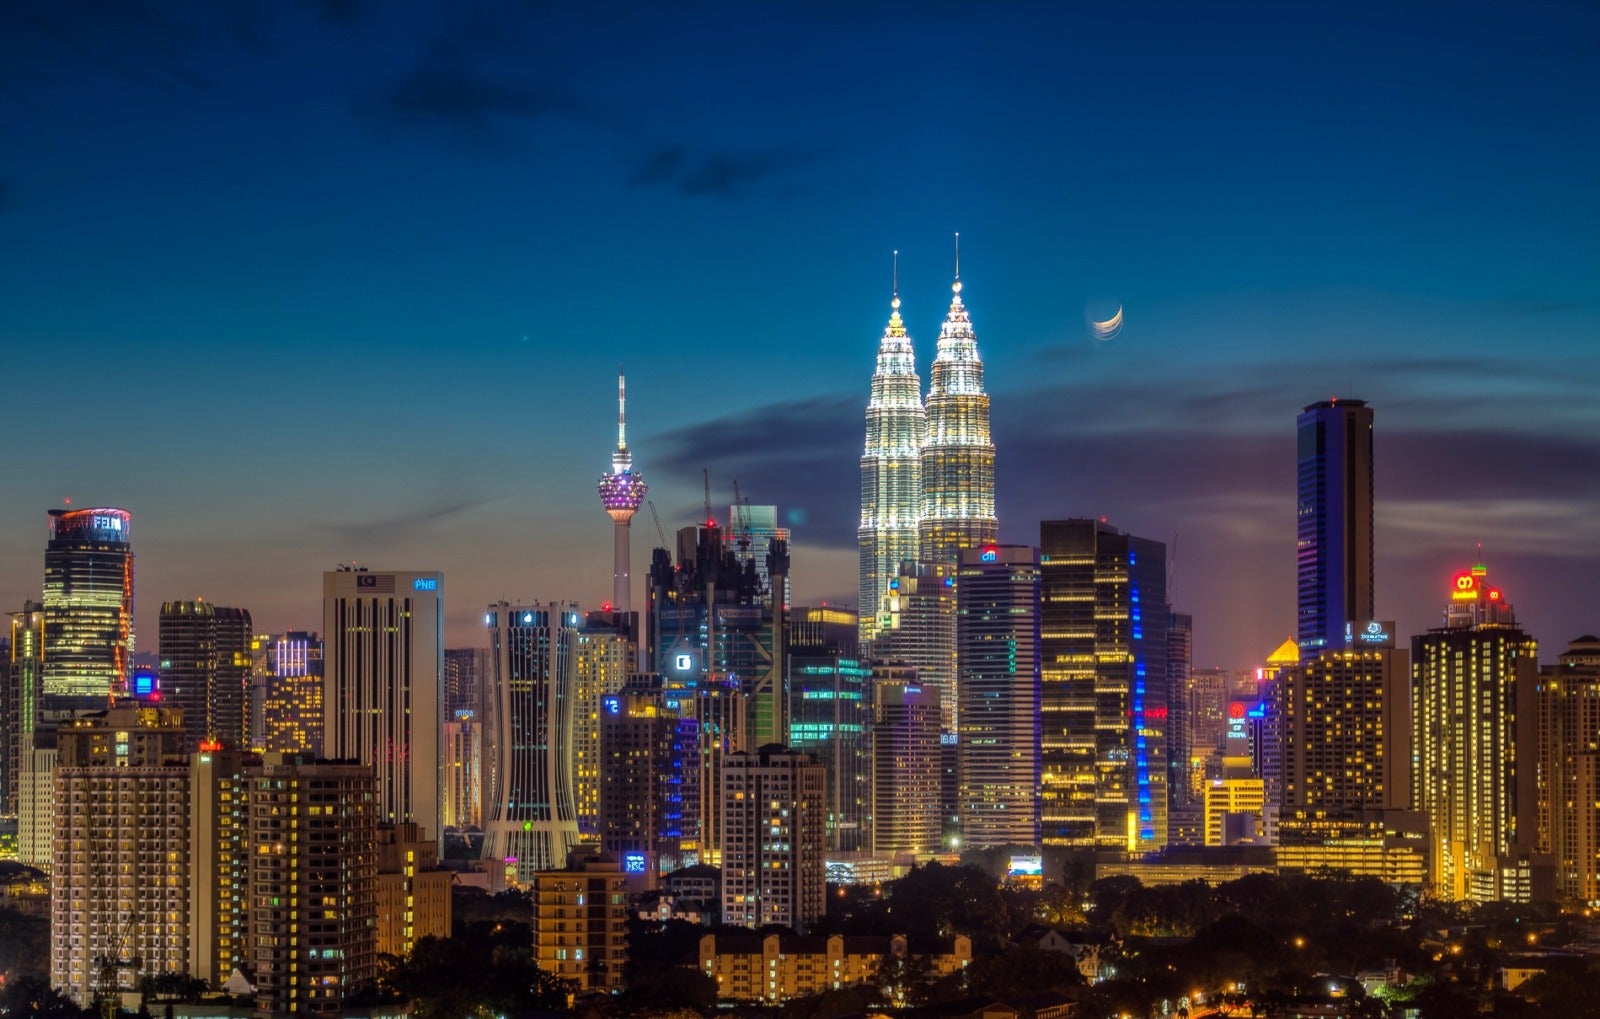 The New Kl Logo Costs Rm15,000 But Malaysians Could Make It For Free Instead - World Of Buzz